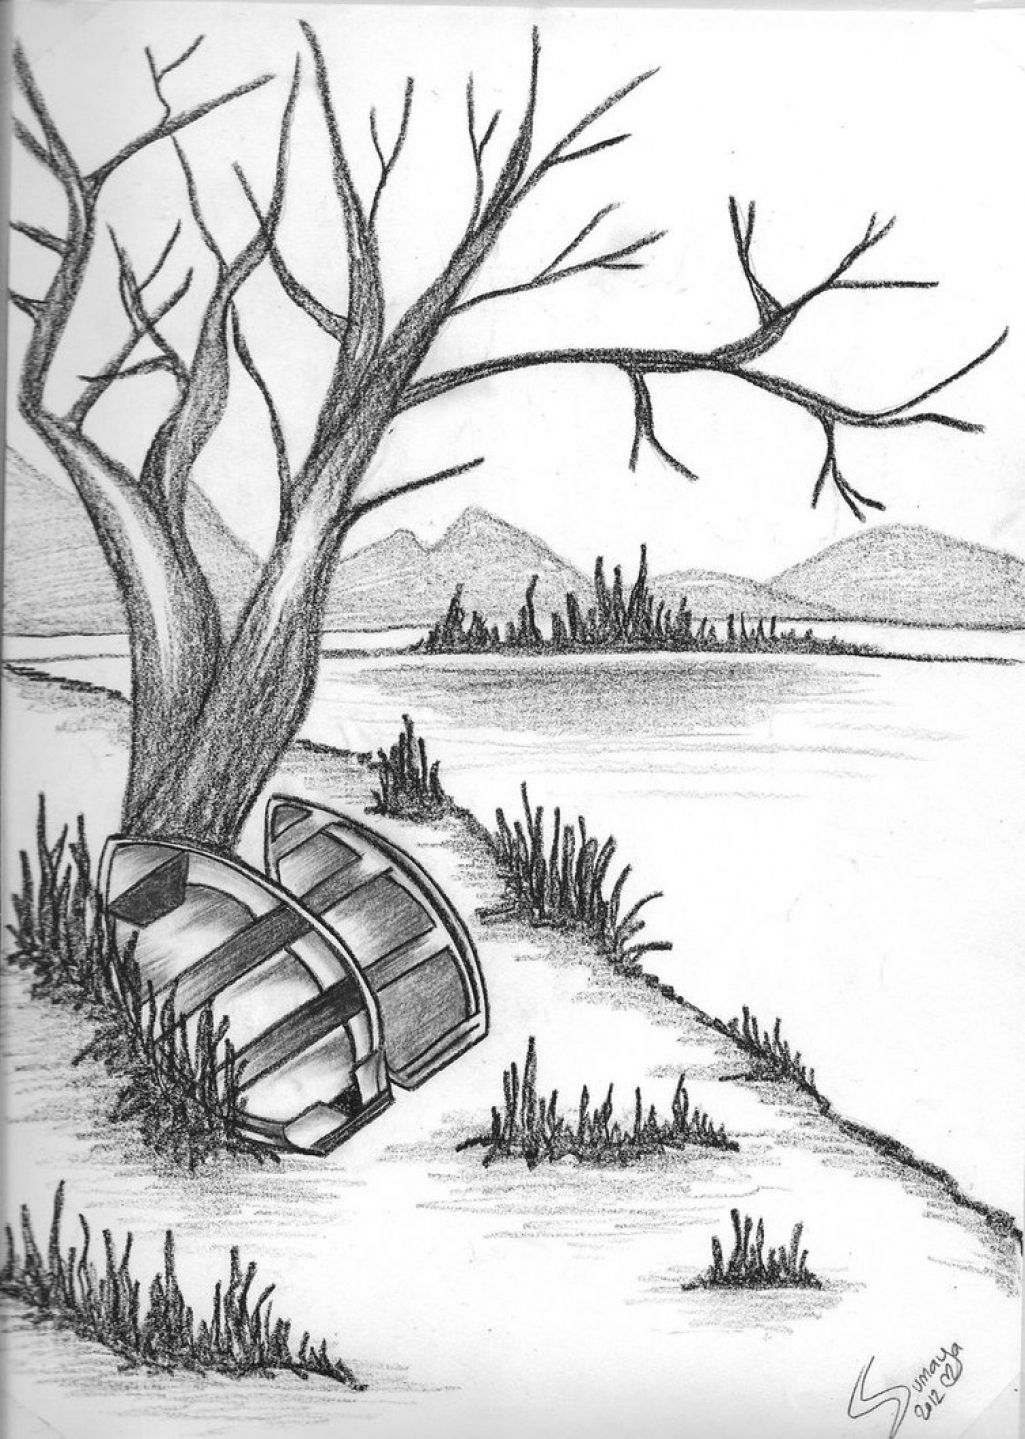 The Best Free Scenery Drawing Image Download From 50 Free Drawings. Pencil drawing picture, Pencil drawings of nature, Cool drawings